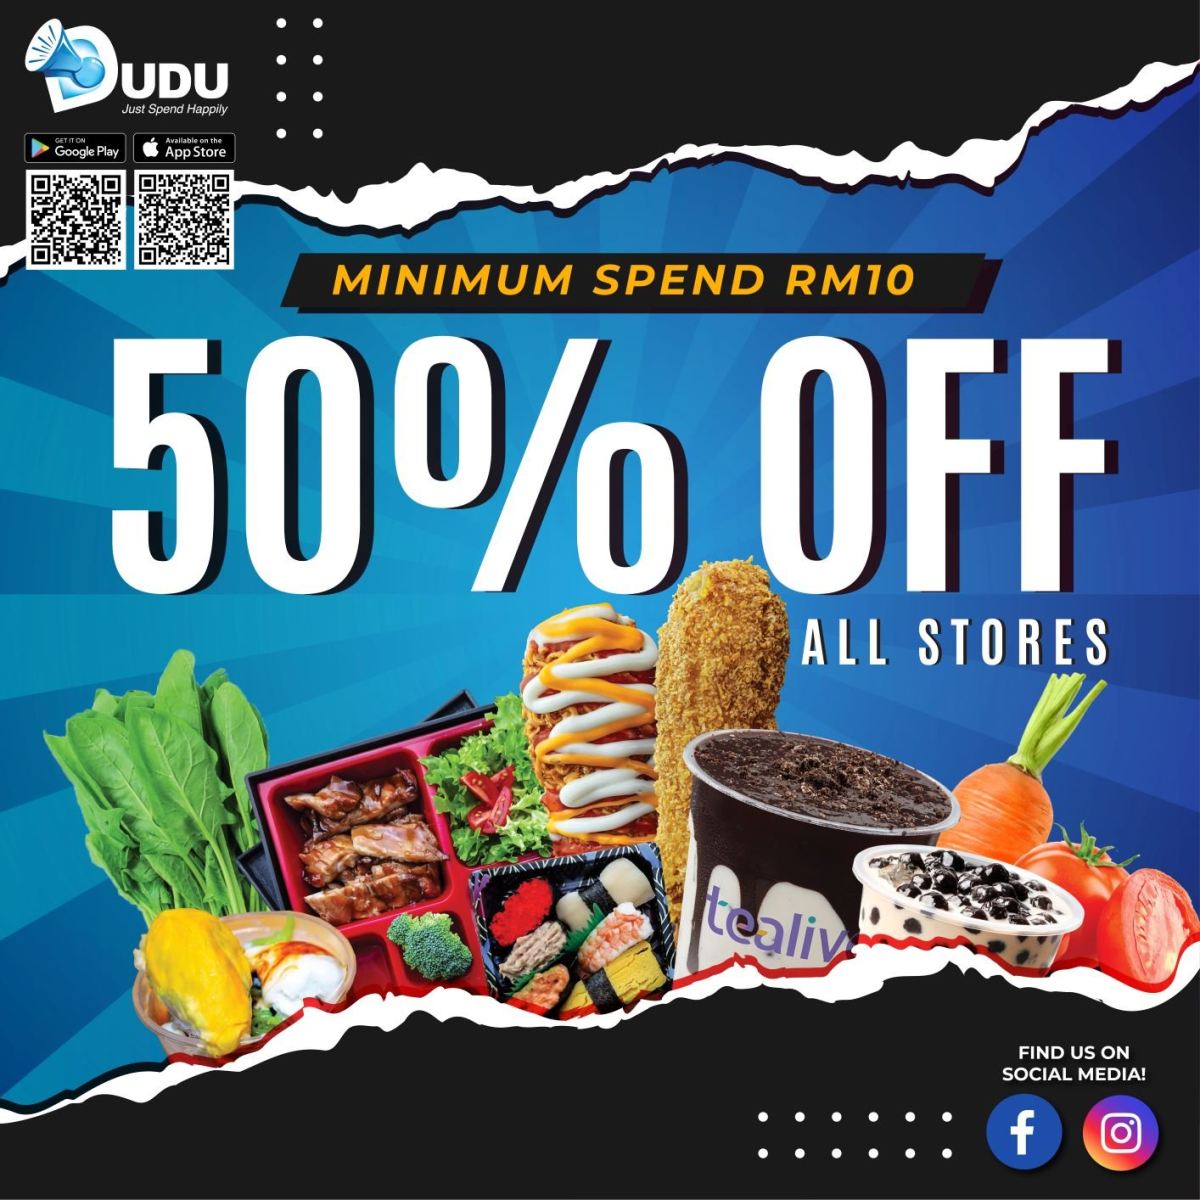 50% OFF with RM10 Minimum Spend